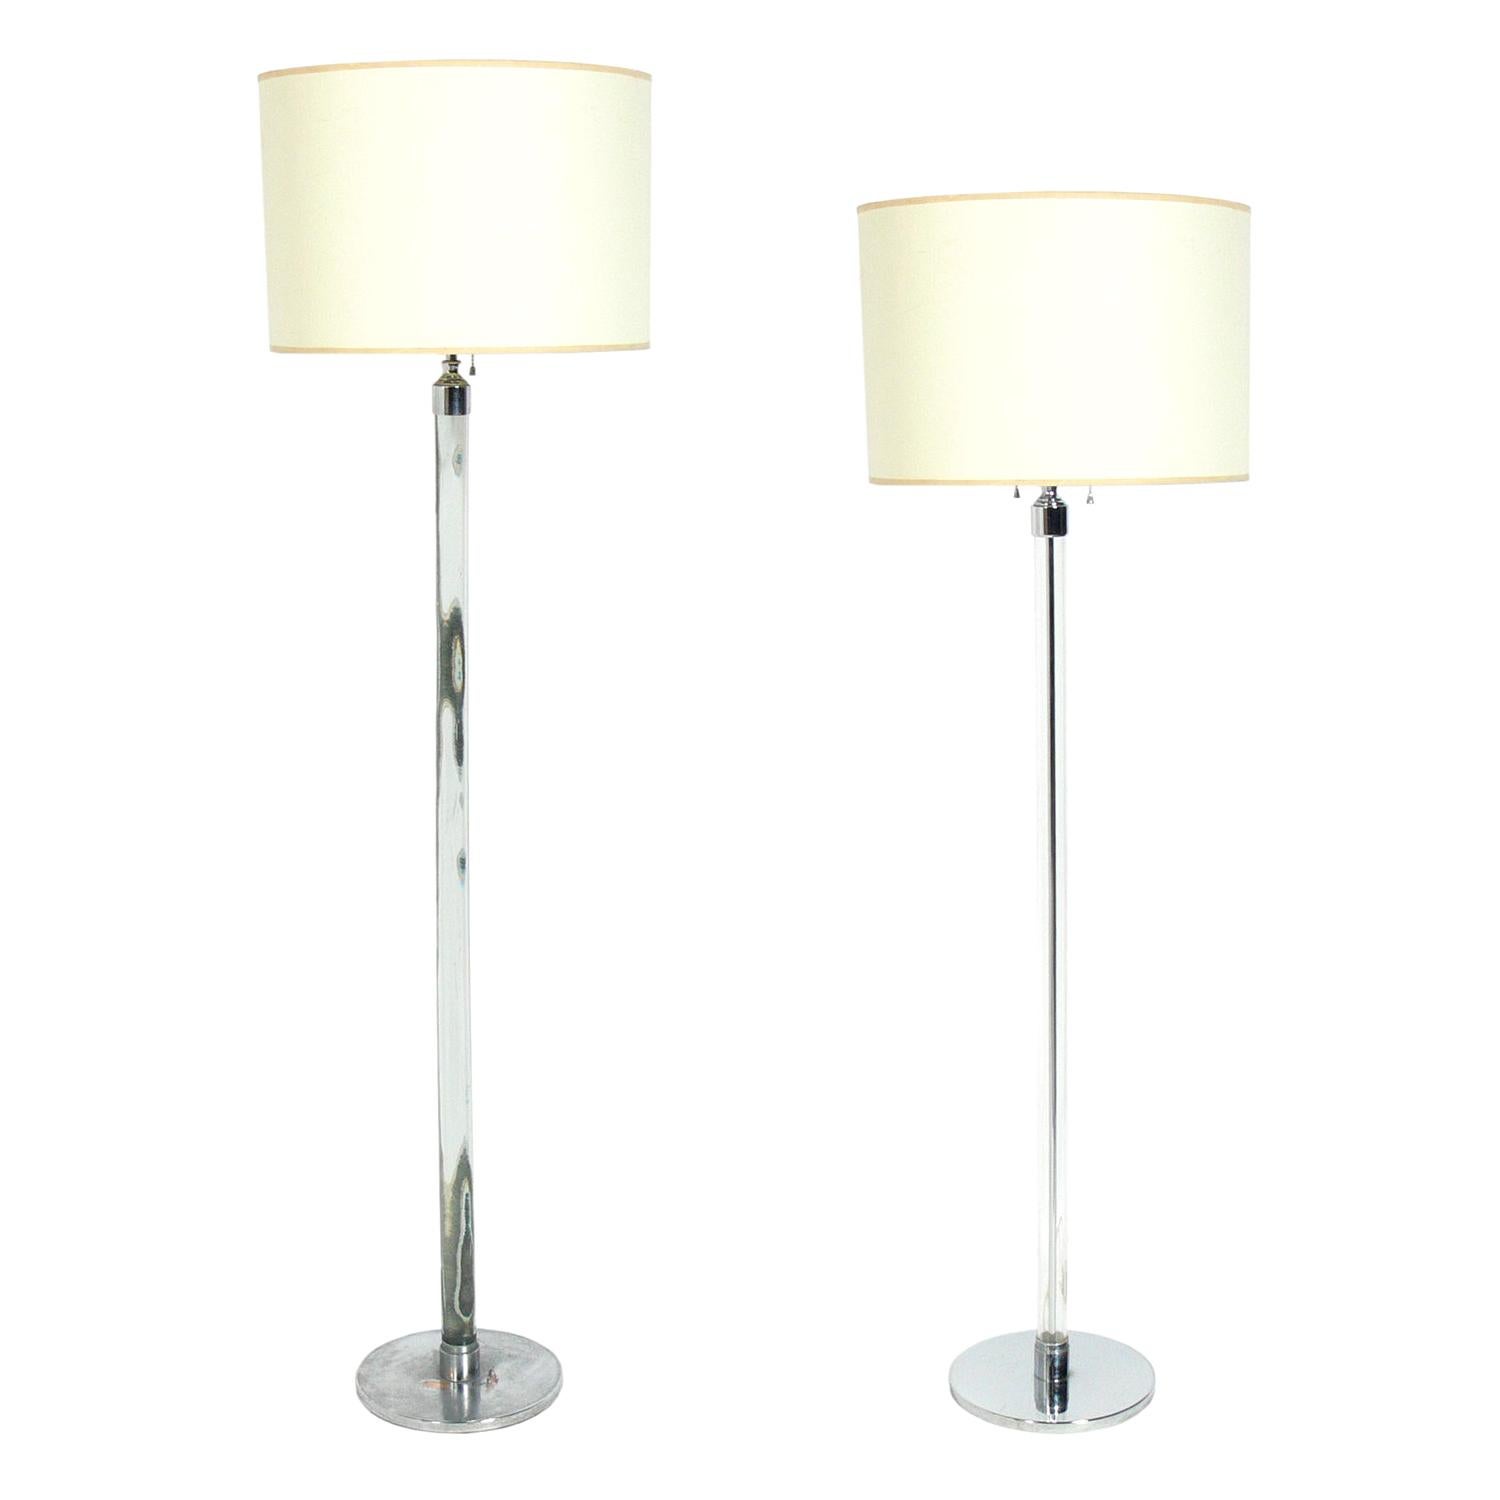 Selection of 1940s Glass Rod Floor Lamps by Hansen For Sale